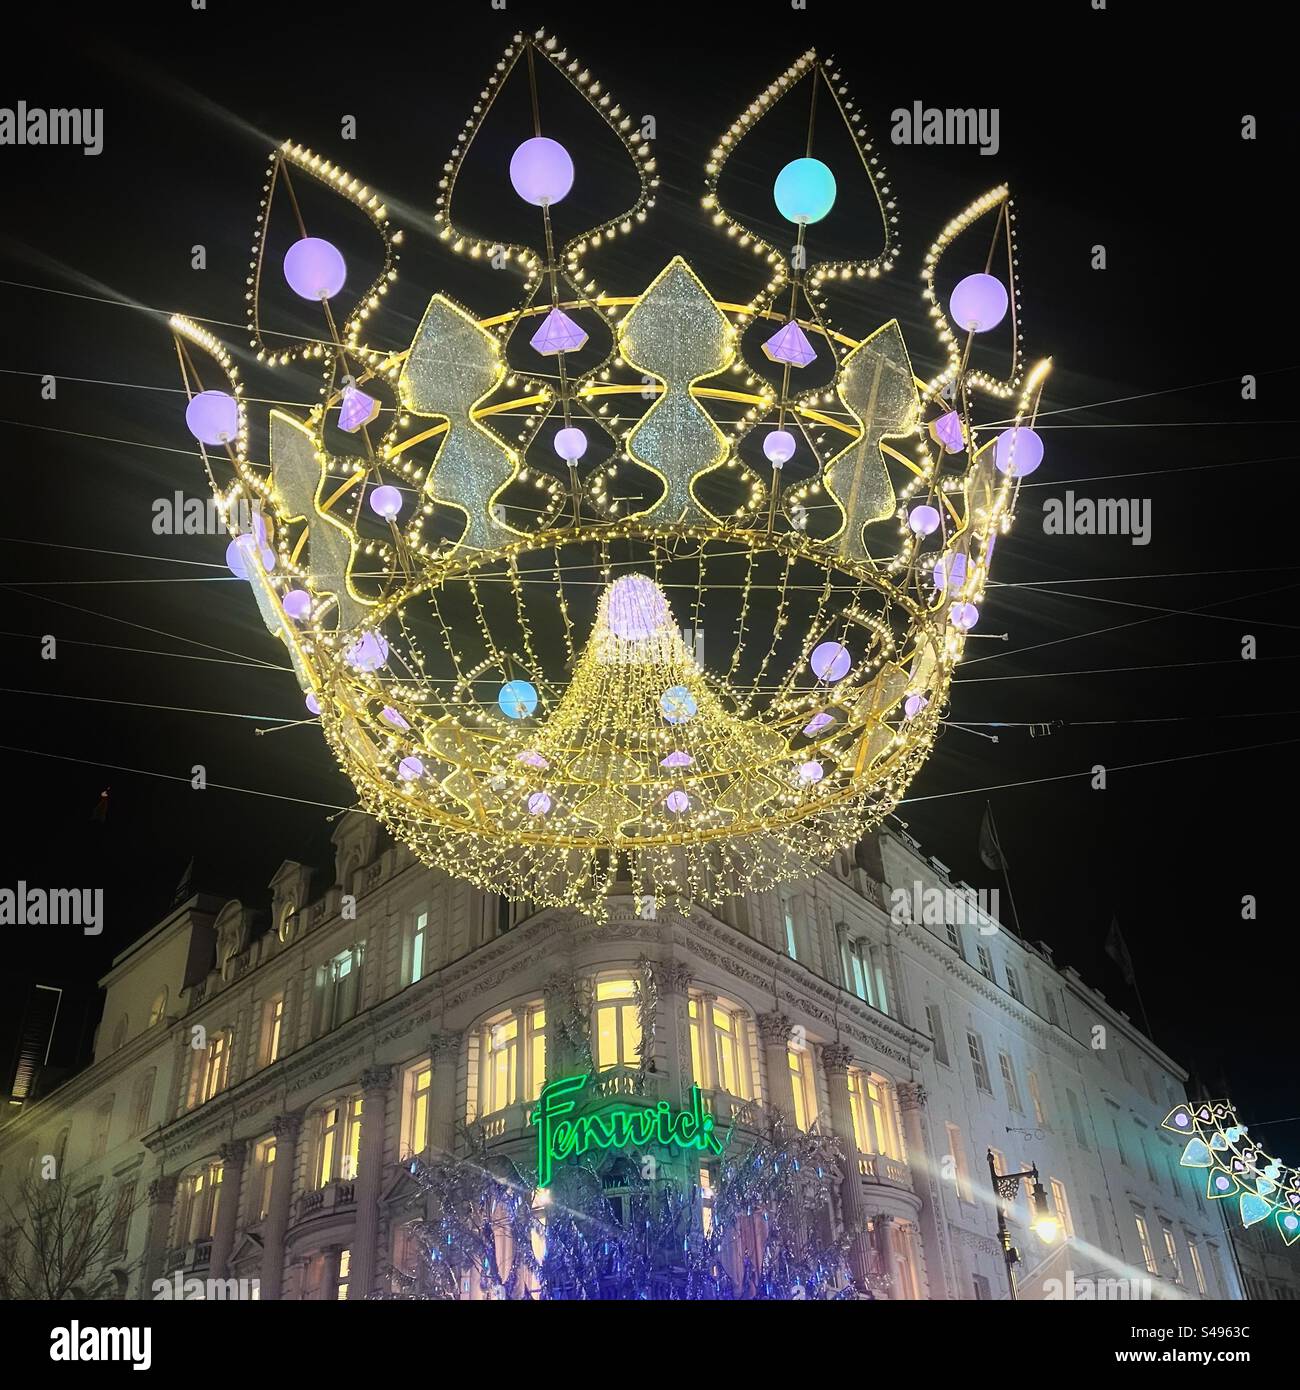 Giant crown street Christmas lights in front of Fenwick Department store in Bond Street in London at night. Colourful winter scene. Stock Photo